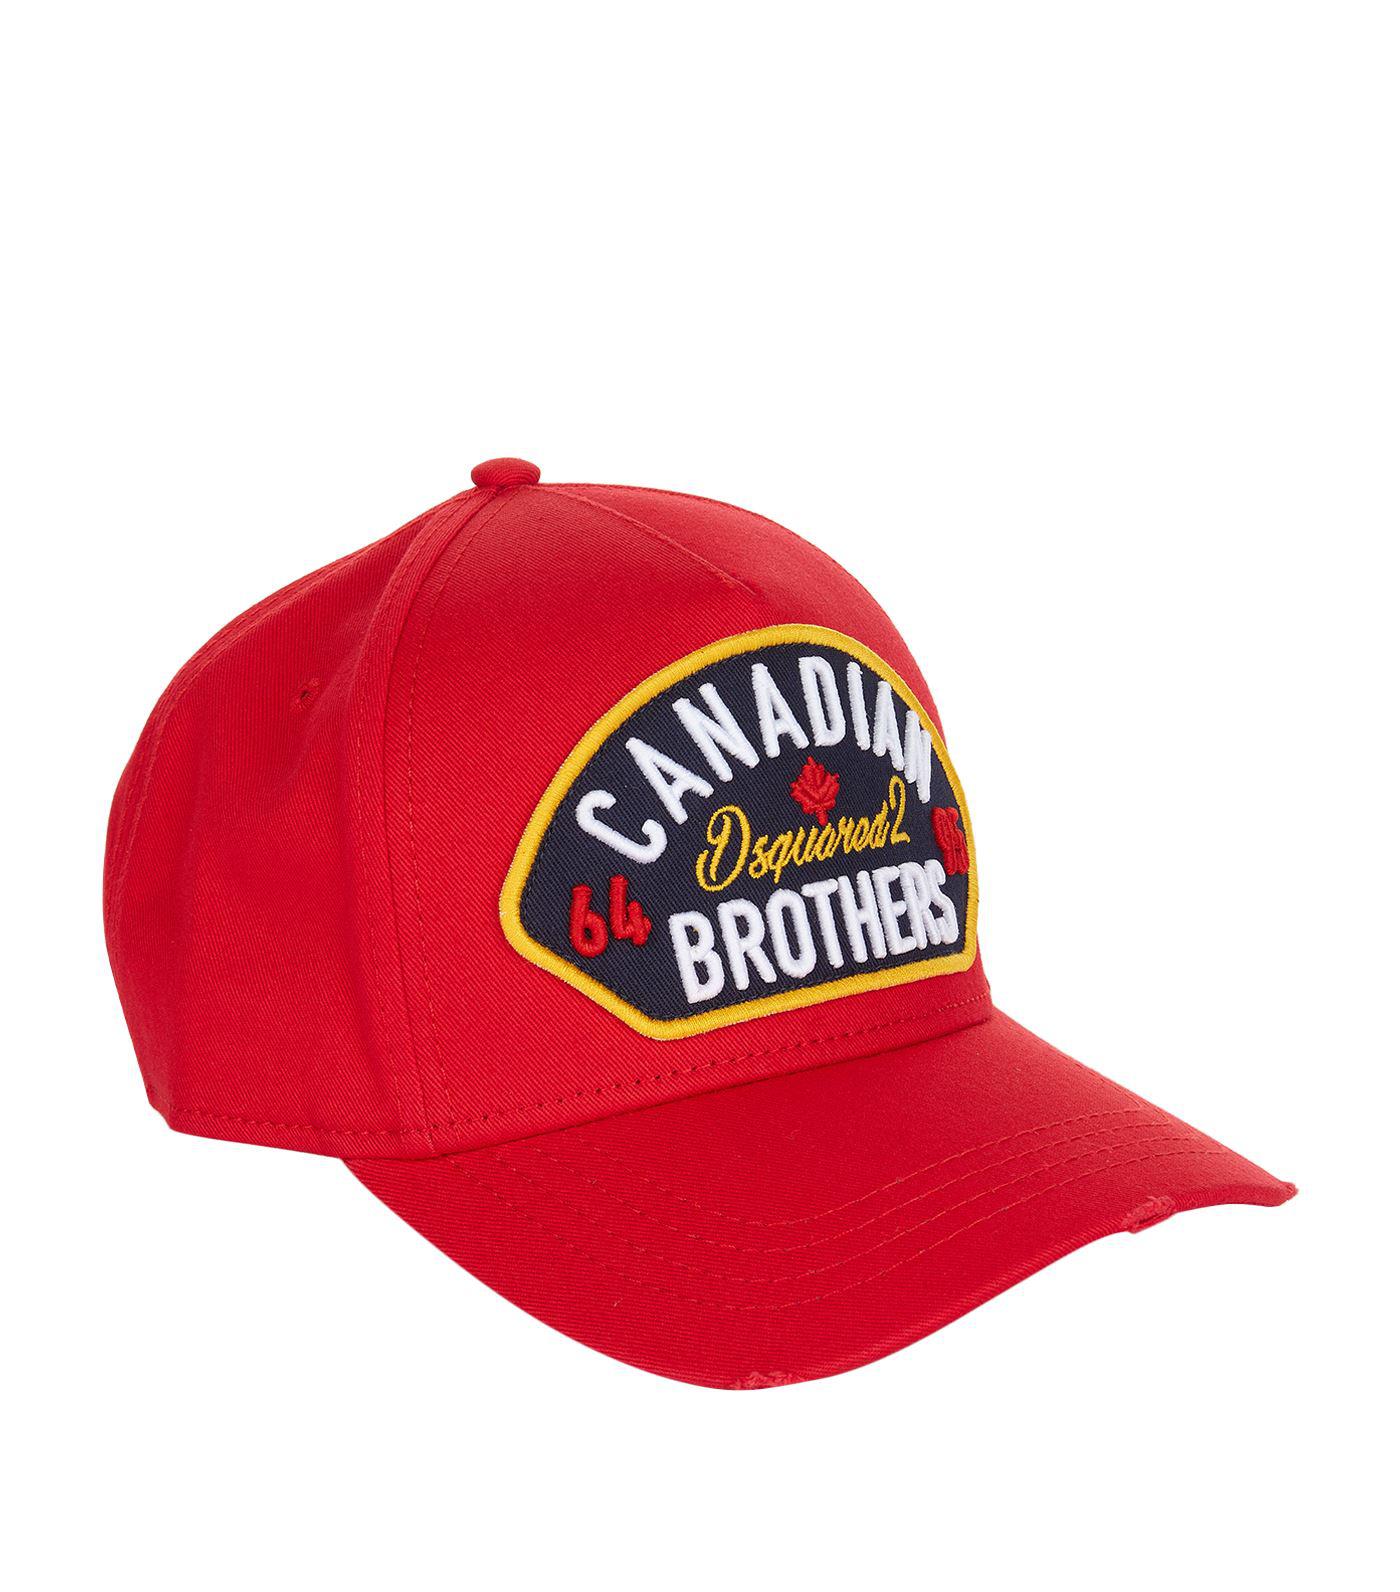 DSquared² Canadian Brothers Cap in Red 